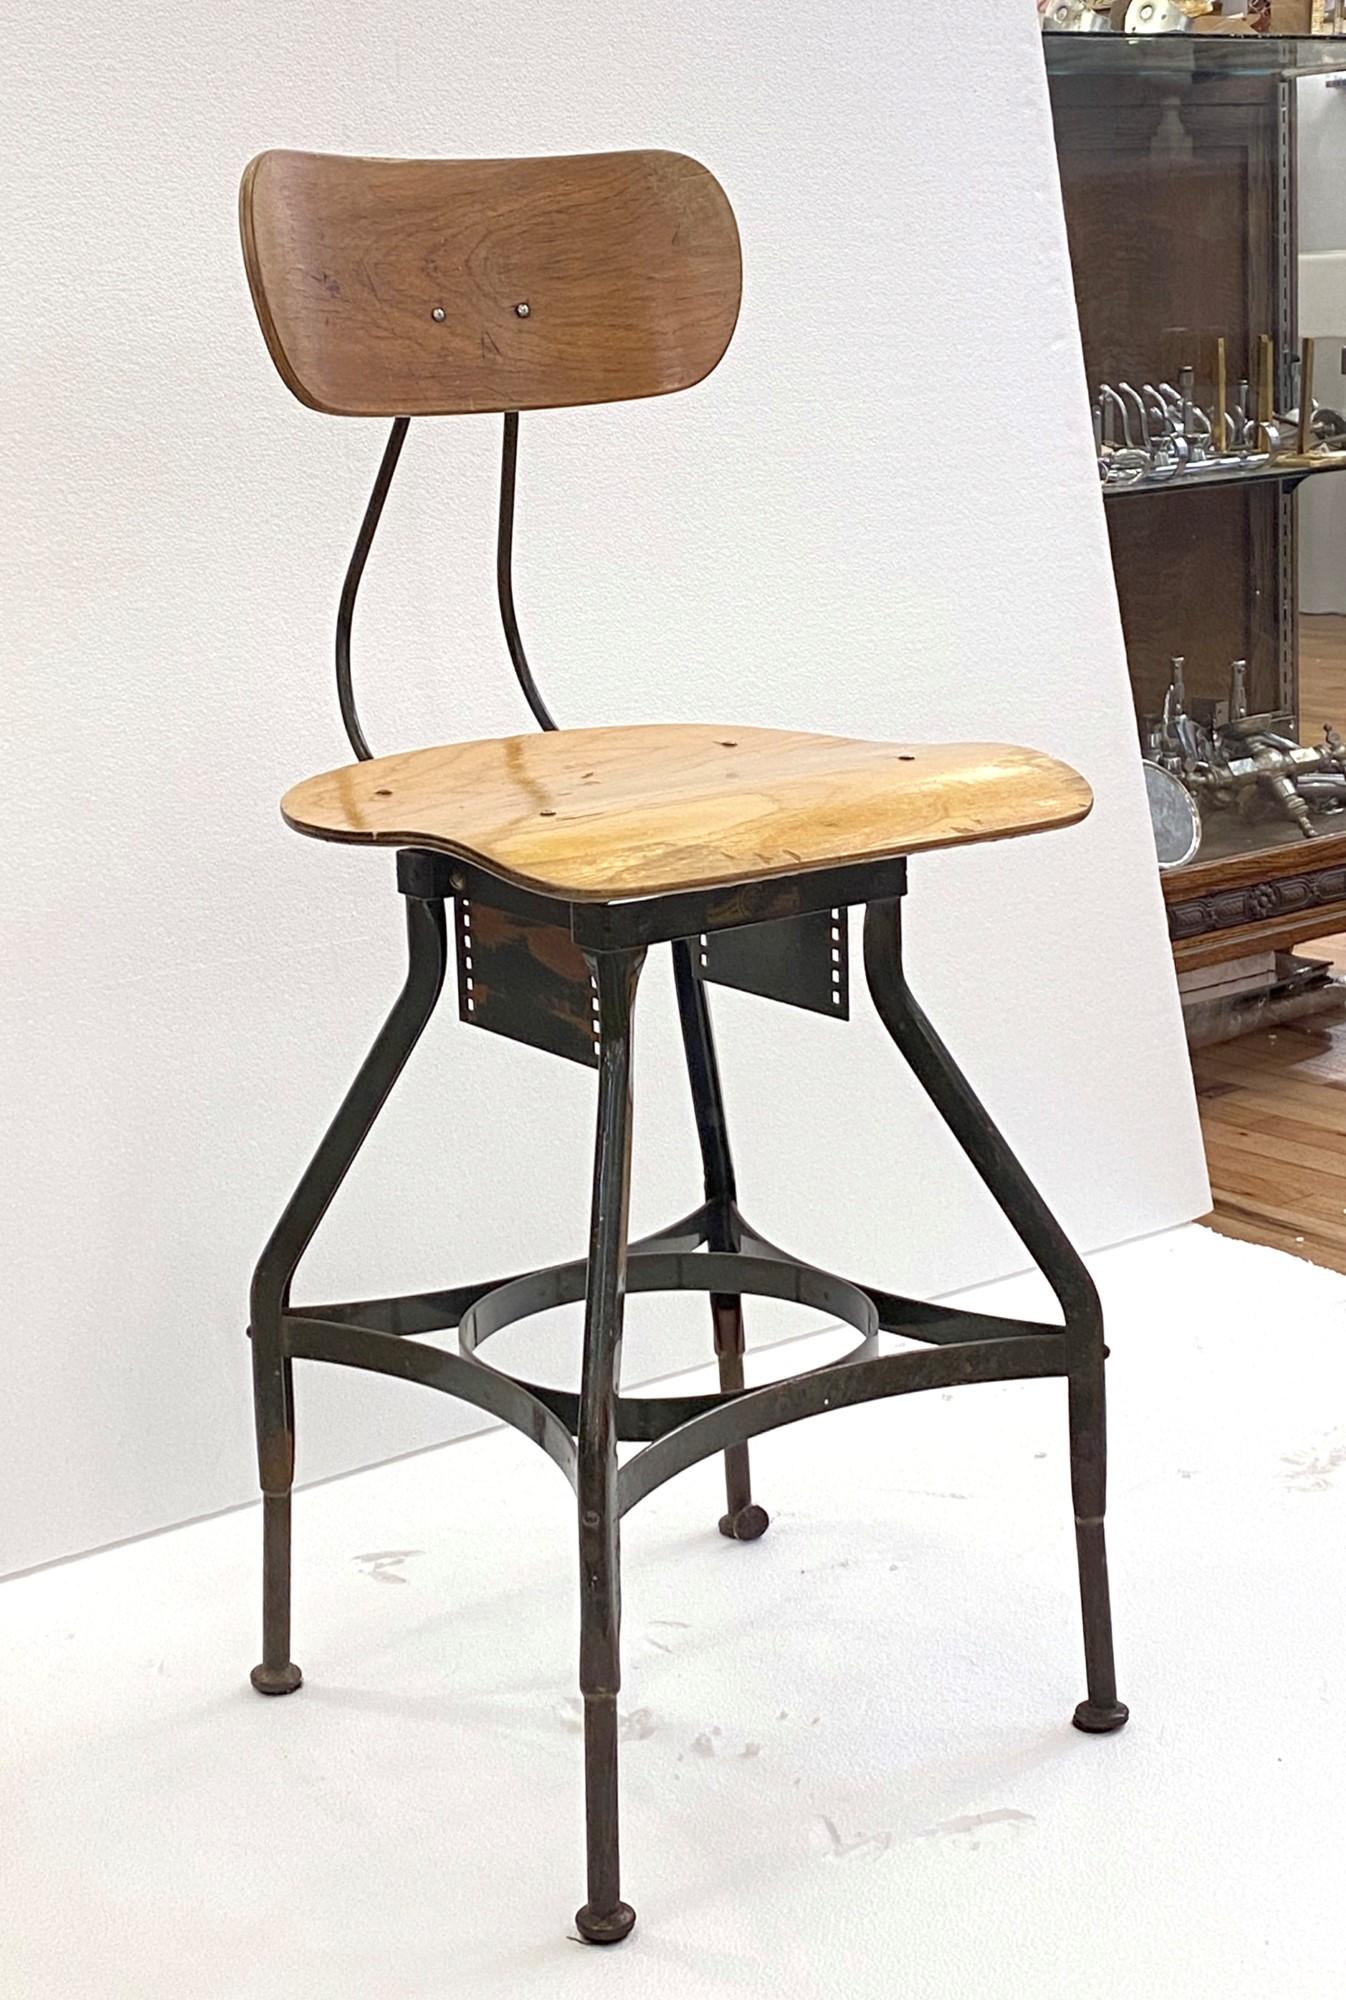 The Toledo Metal Furniture Company's furniture was designed to stand the test of time. These stools, designed in the early 1900s, were created with schools, industrial shops and draftsmen in mind. The one available here is the classic adjustable